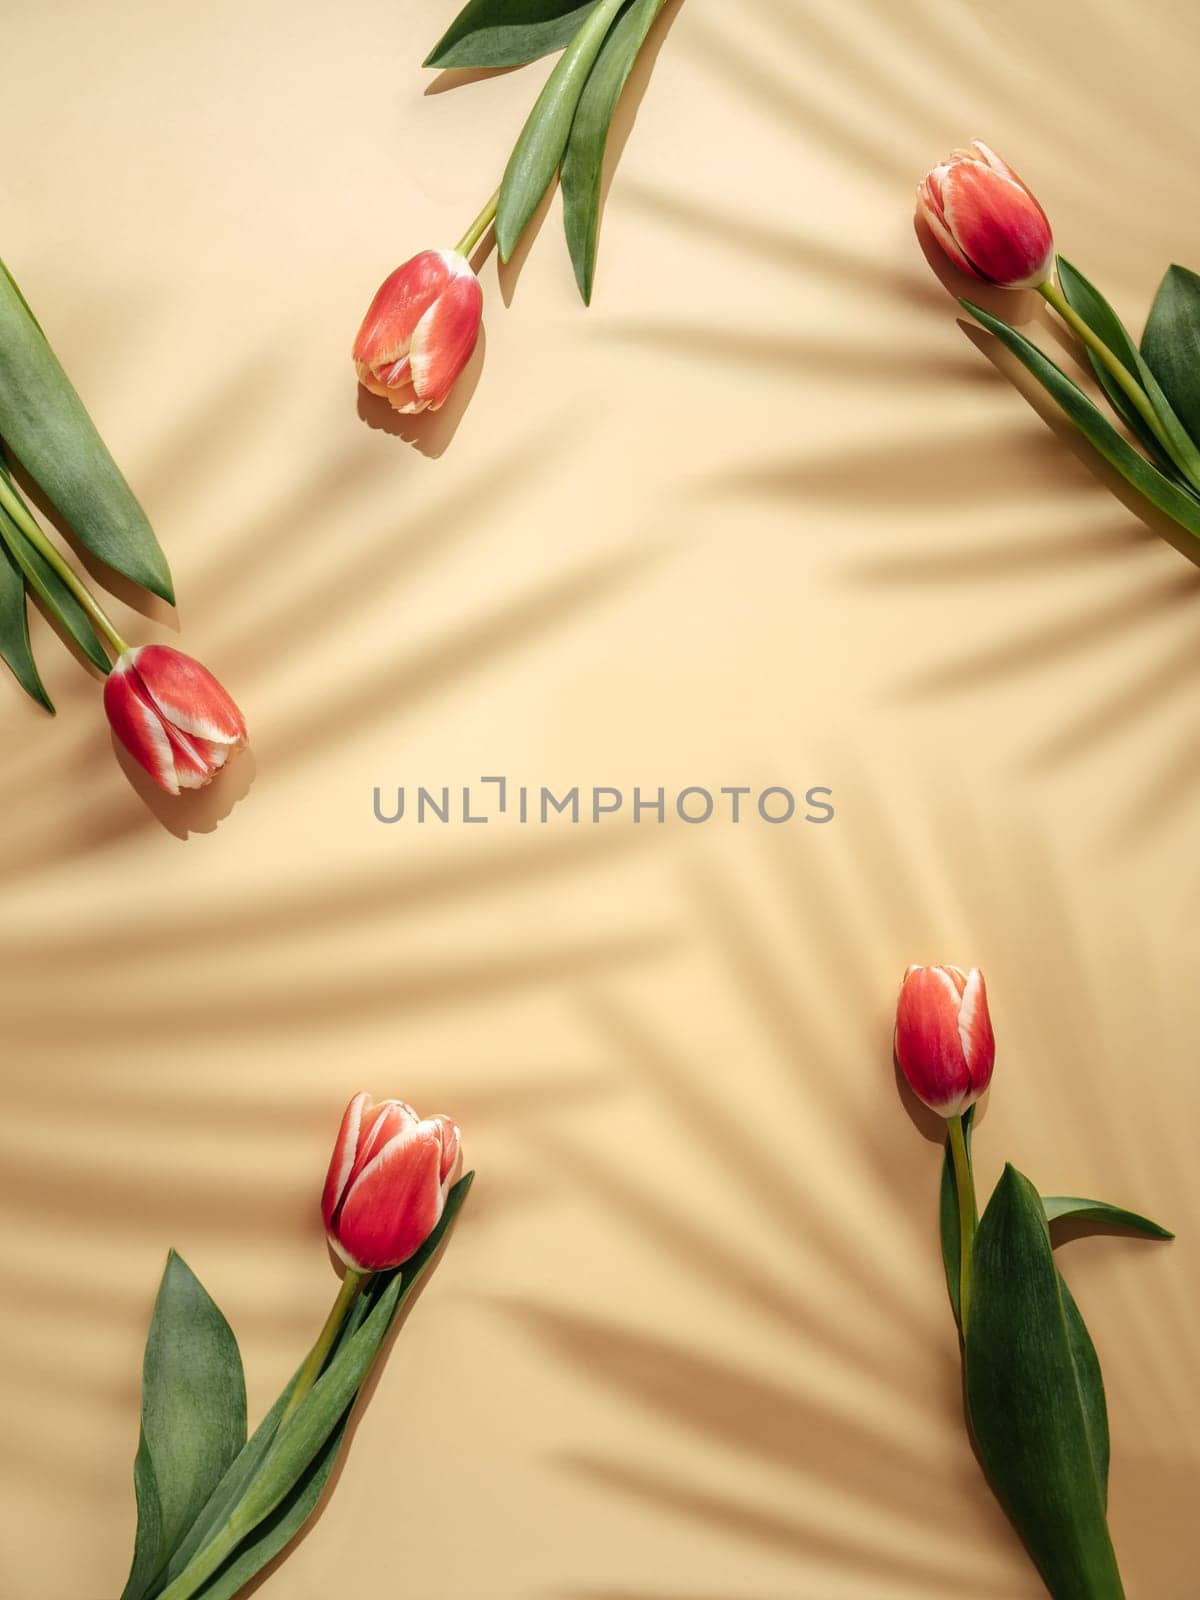 Aesthetic background with red tulips and palm shadows on beige champagne background. Vertical image of perfect tulips with copy space for text in center. Spring flowers. Sell tulips. Spring mood. Top view or flat lay